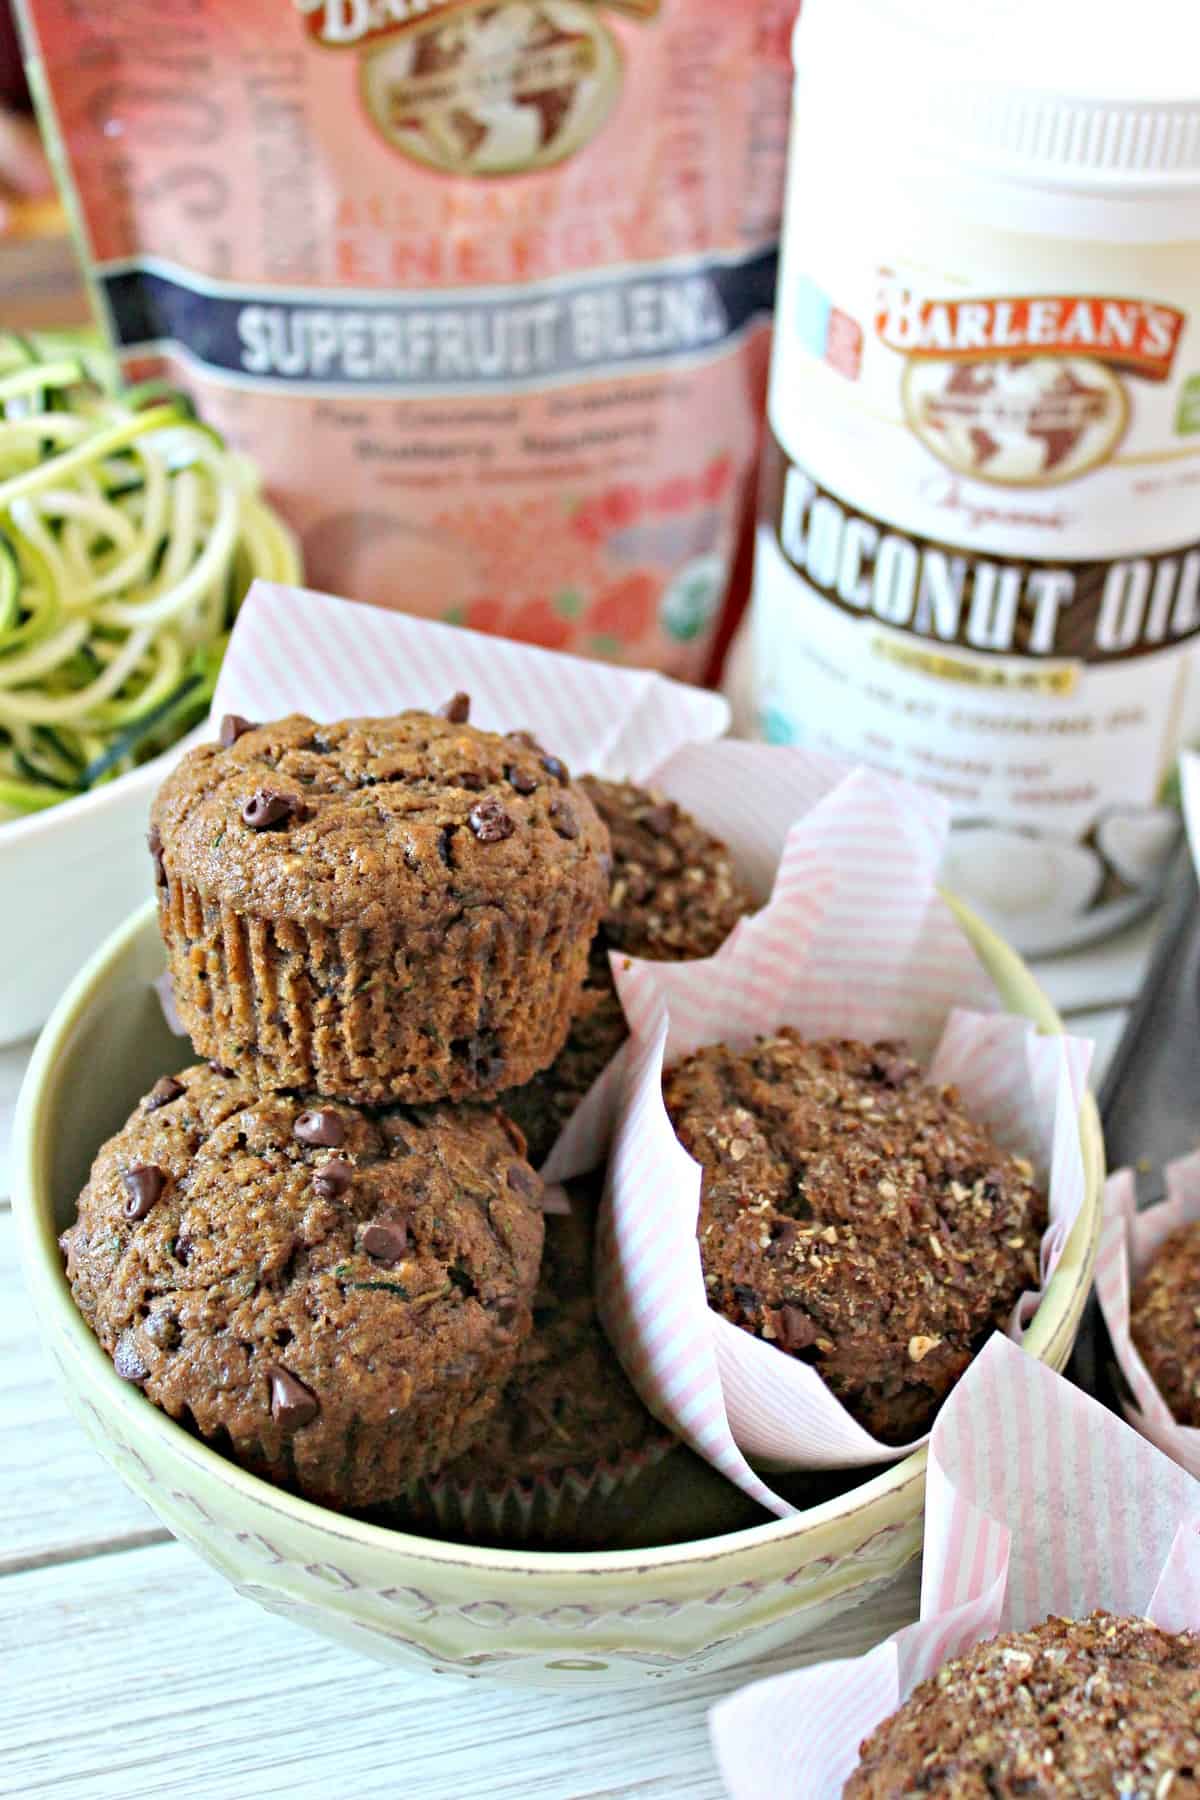 Healthy Zucchini Superfruit Muffins! You won't believe these muffins make a healthy addition to breakfast and brunch by tasting them, but they're bursting with wholesome ingredients! Sweetened with coconut sugar and fortified with flax, superfruits and zucchini, they're a muffin you'll want to make again and again.